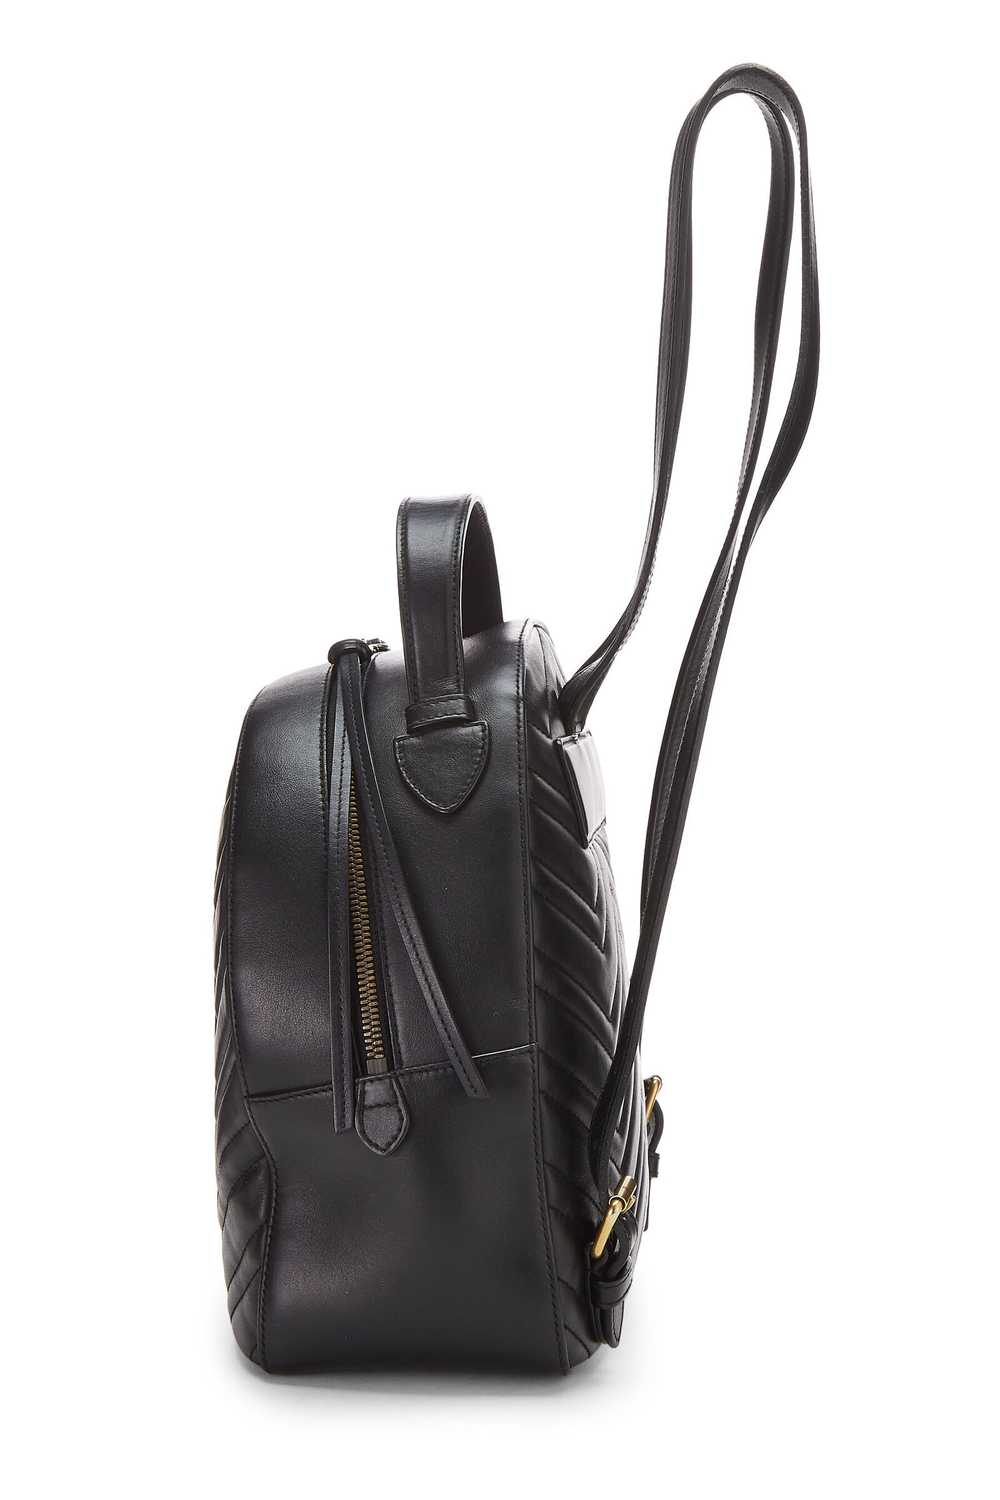 Black Leather Marmont Backpack - image 4